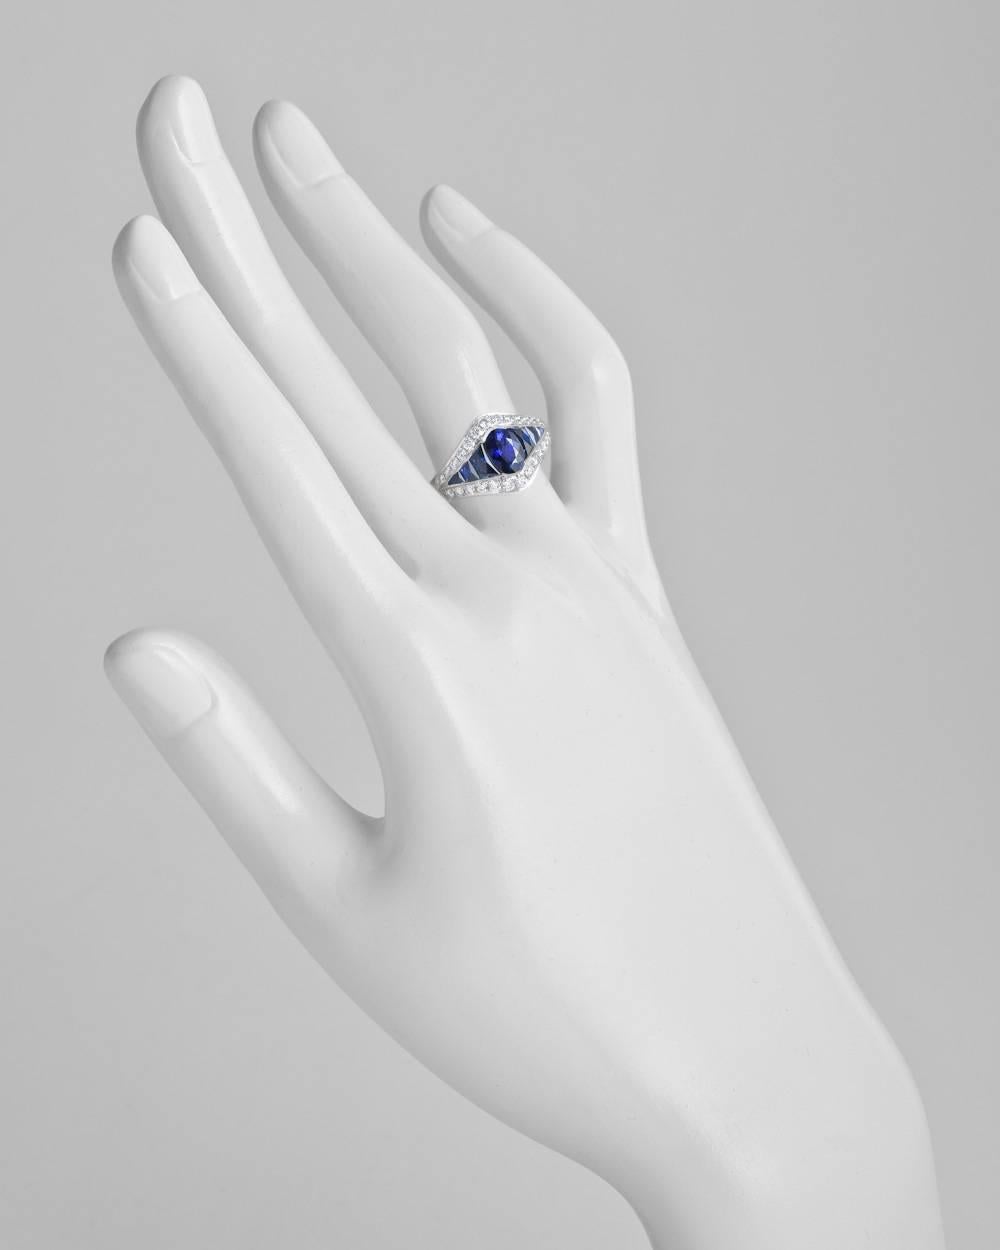 Sapphire and diamond three-row dress ring, showcasing a larger oval-shaped sapphire at center flanked by smaller calibre-cut sapphires, within a near-colorless round brilliant-cut diamond surround, mounted in platinum. Oval-shaped sapphire weighing